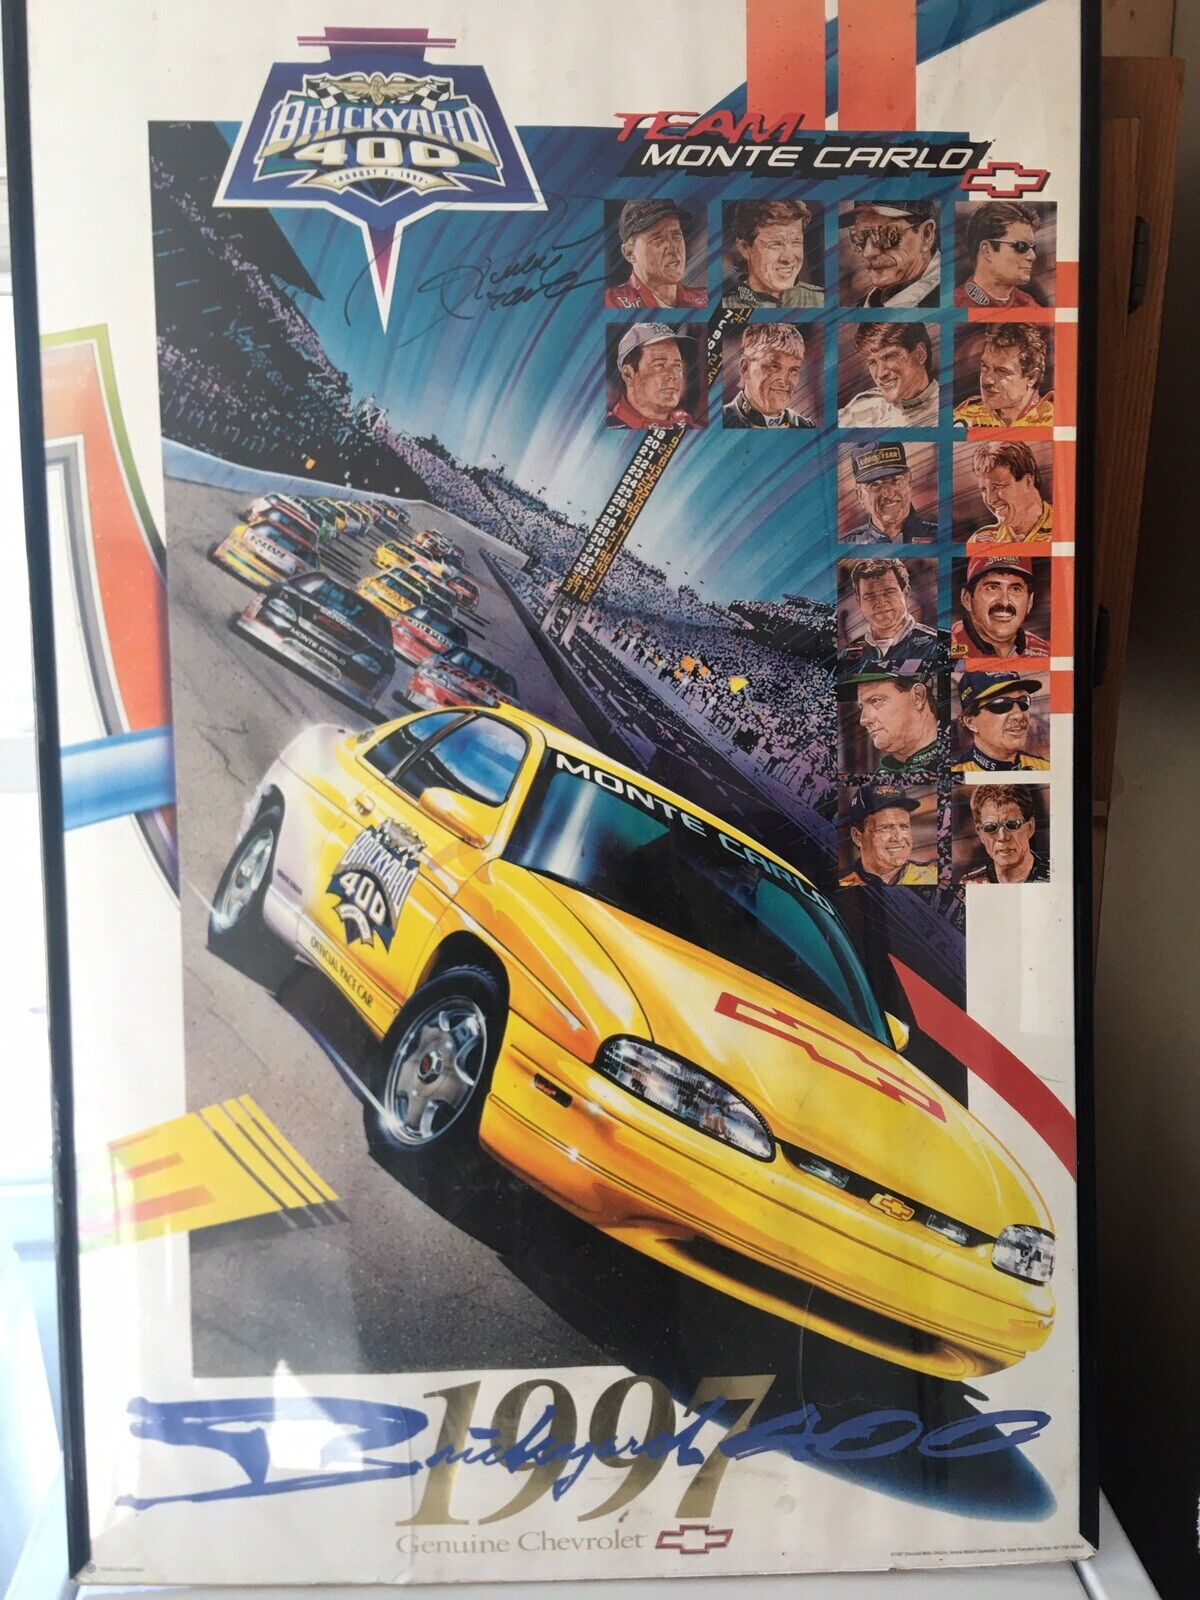 1997 CHEVY, SIGNED BY Ricky Crave SHOWROOM POSTER VEHICLE BRICKYARD 400 24 X 36